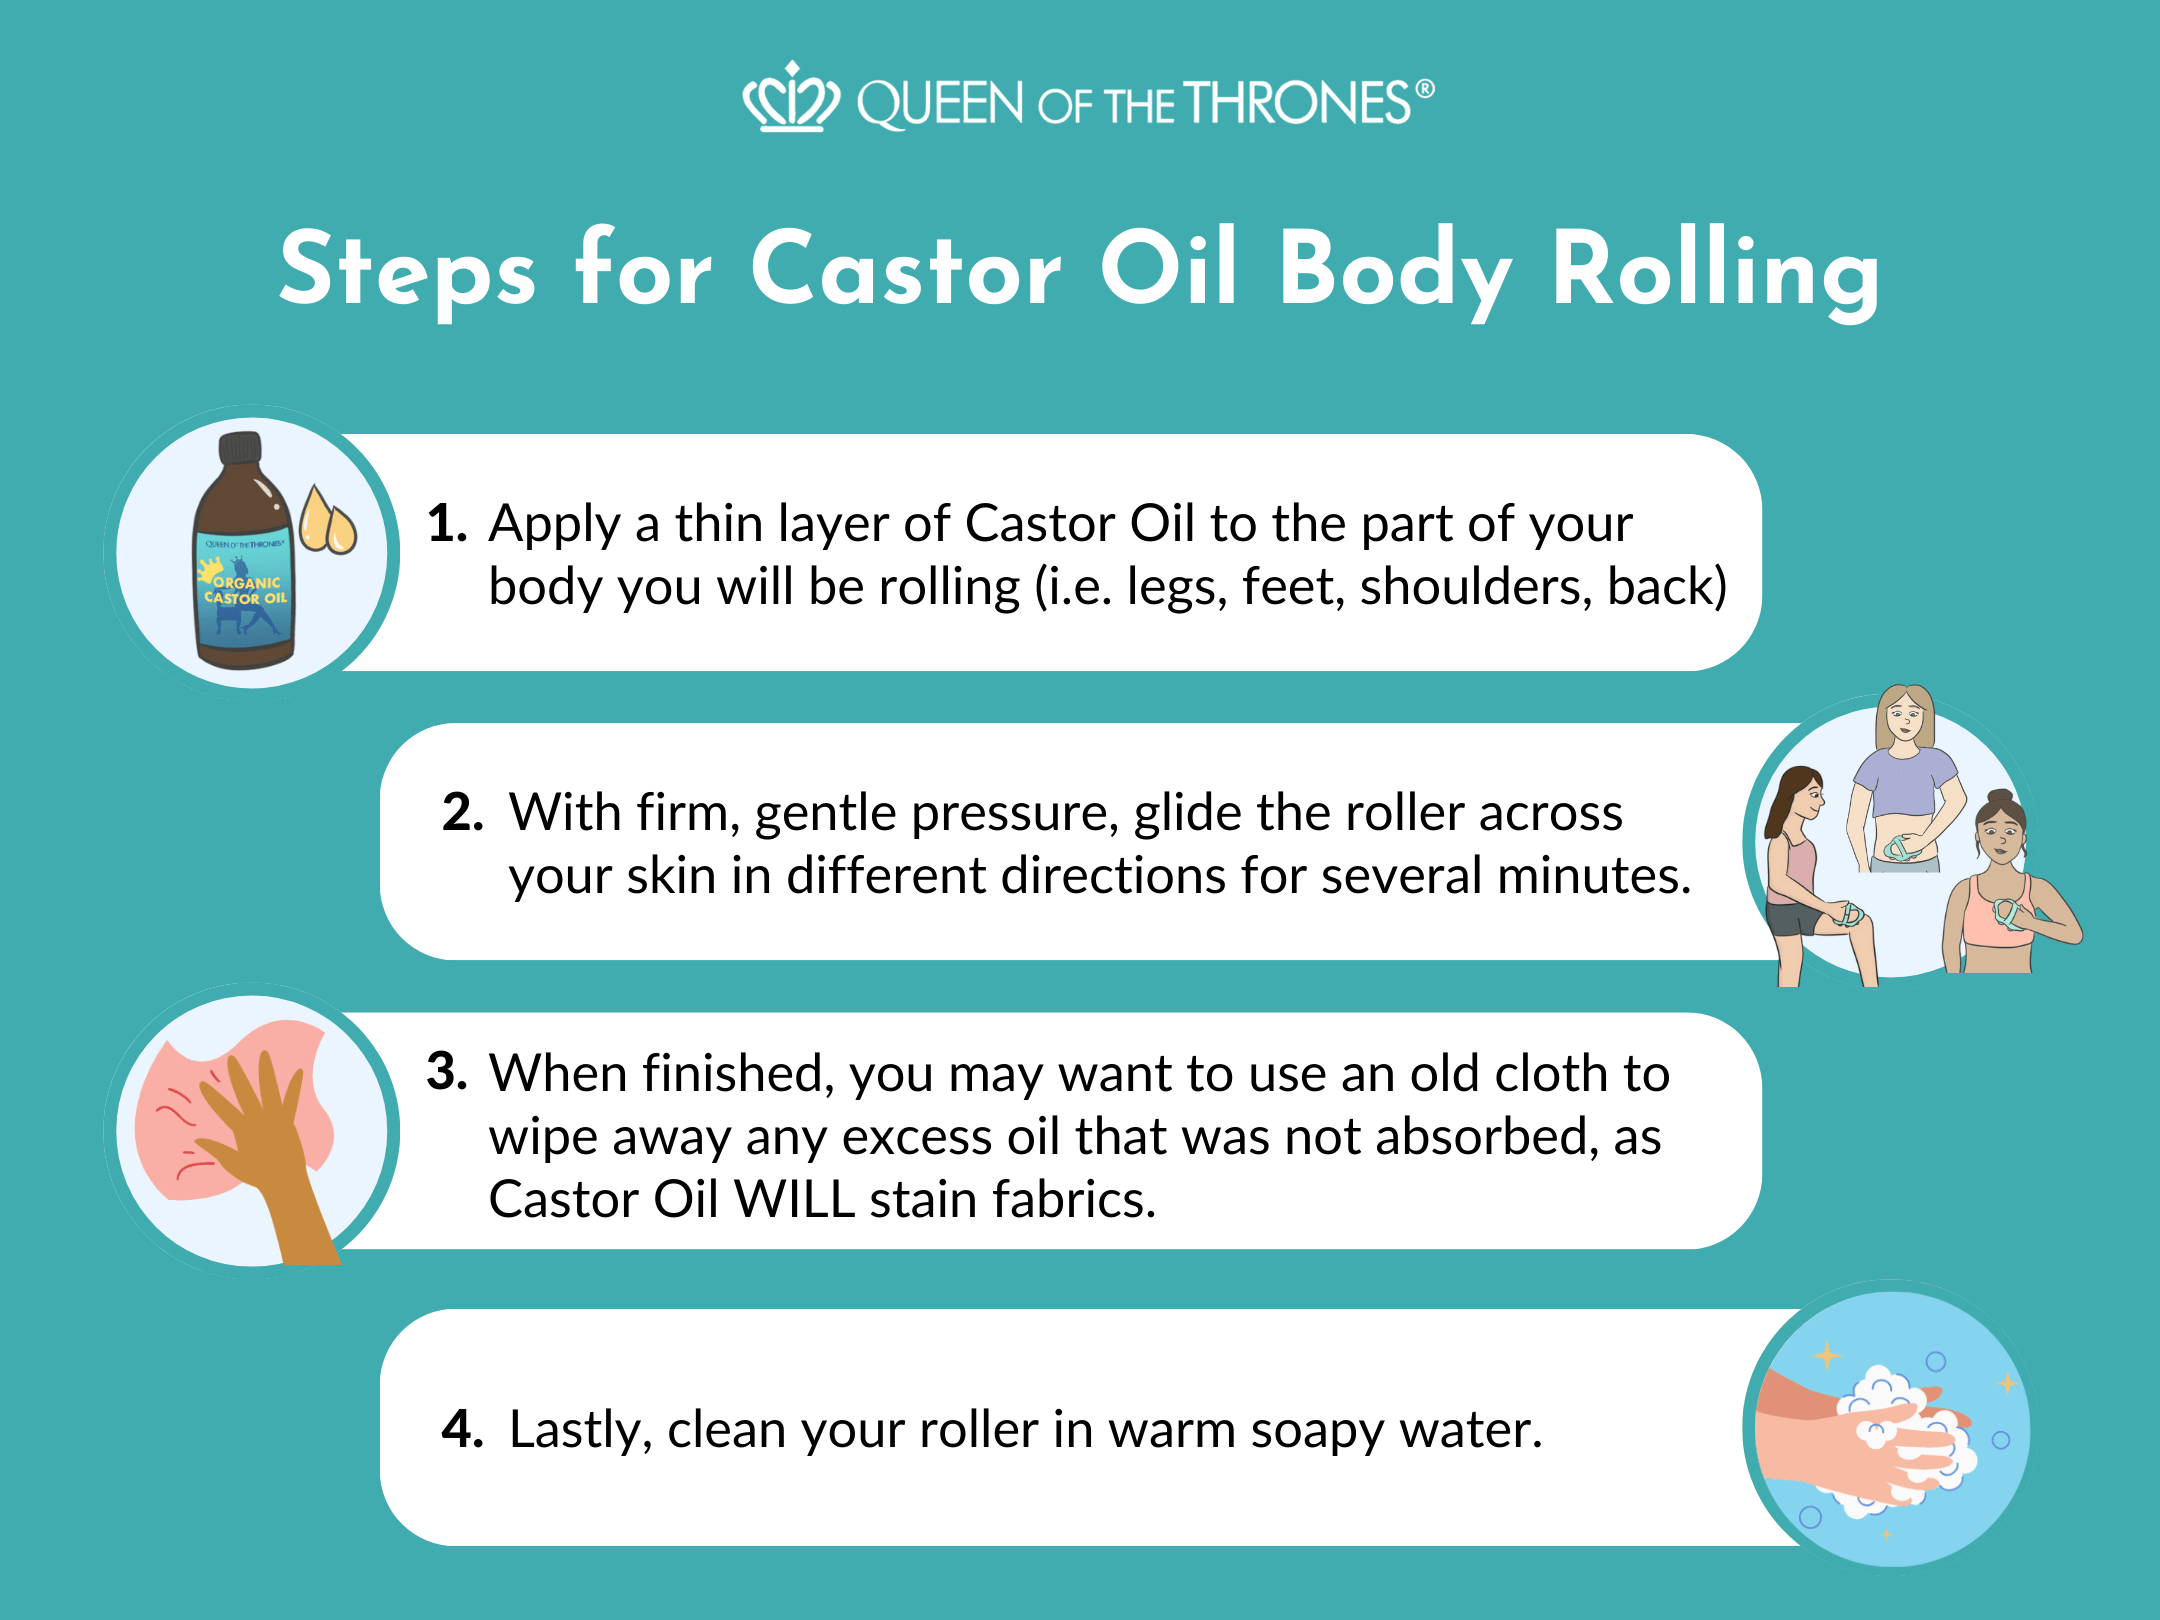 Steps for Castor Oil Body Roller by Queen of the Thrones